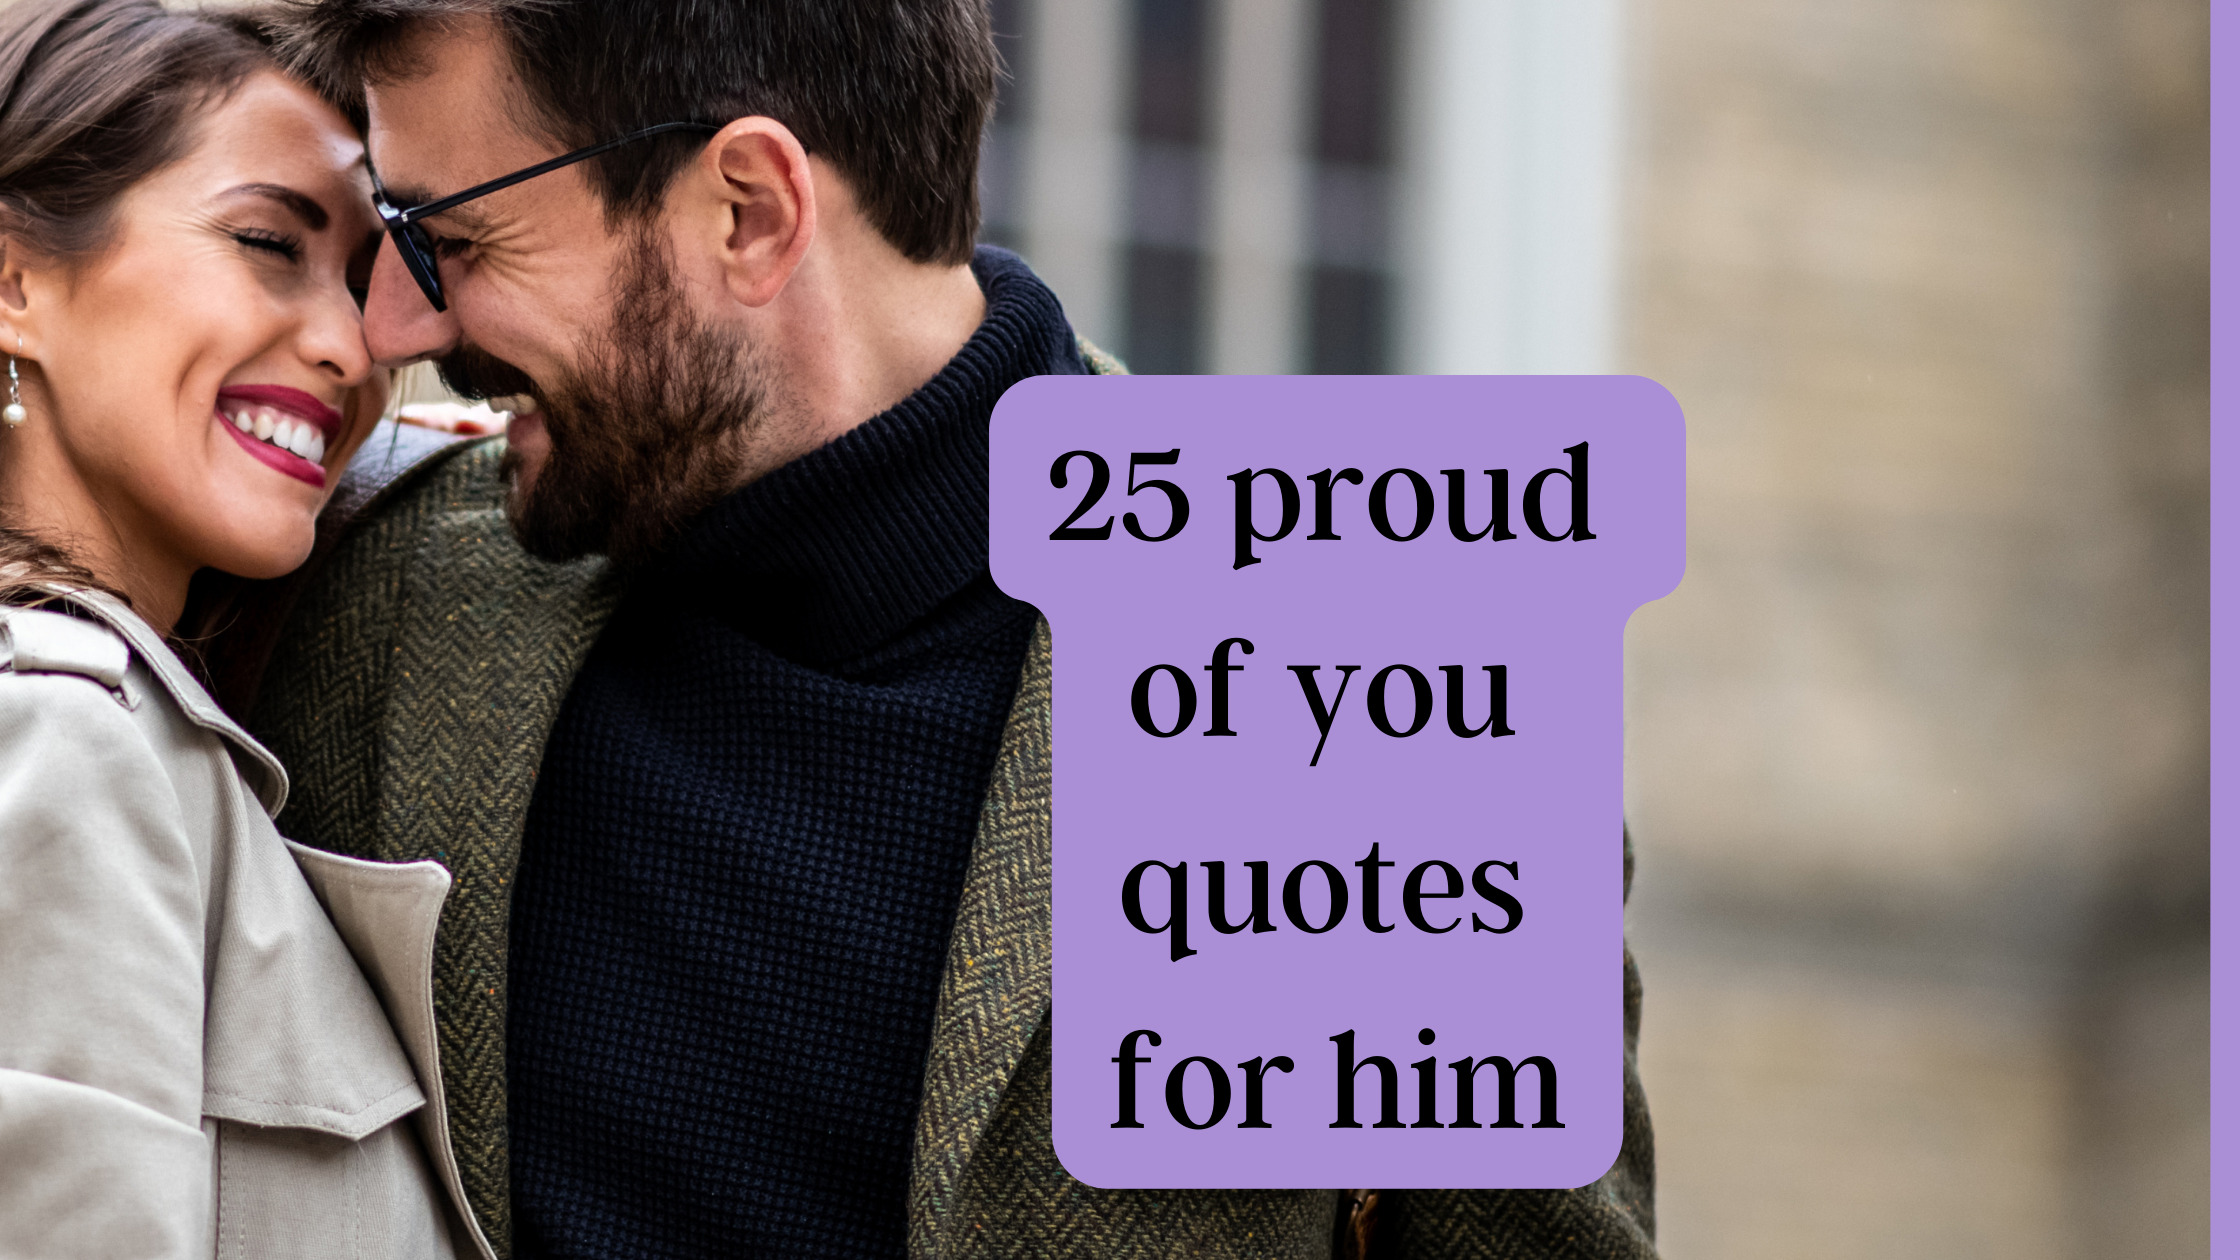 25 proud of you quotes for him